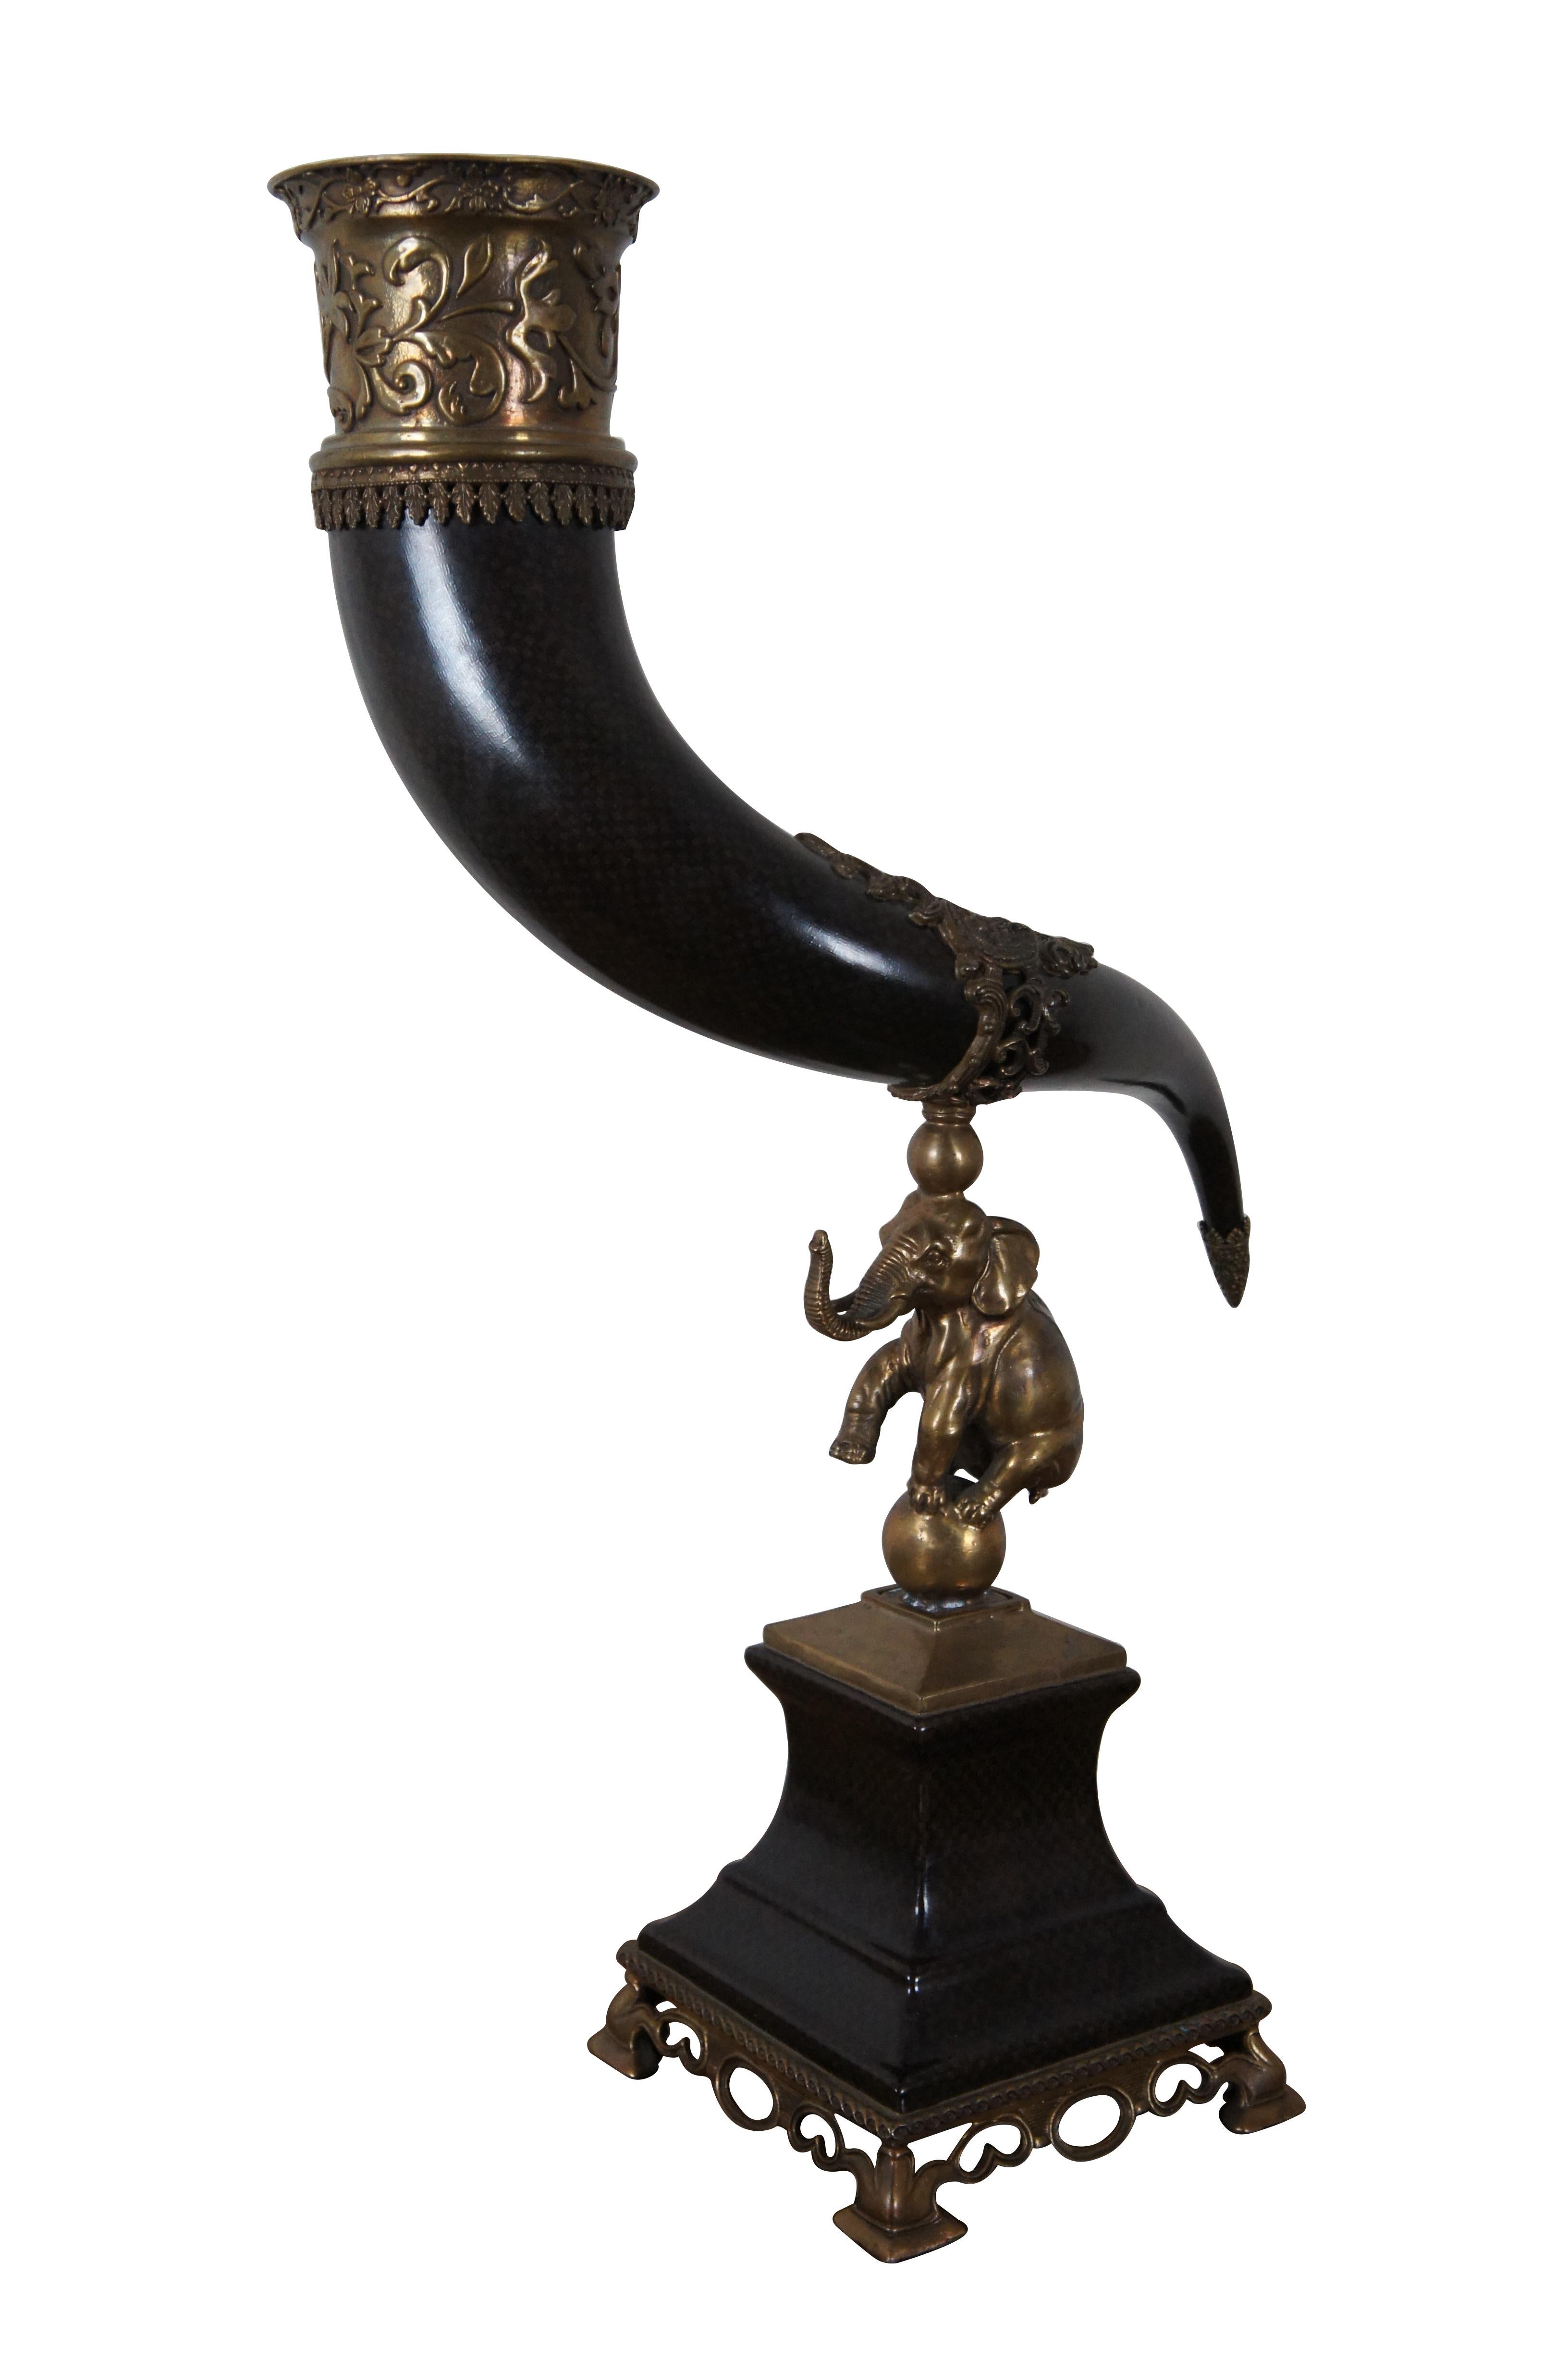 Ornamental hunt theme drinking horn / centerpiece trophy / cornucopia epergne / flower vase featuring a tapered pedestal base with brass capped feet and circus Elephant balancing a porcelain horn or tusk. Stamped on base, Item No. 4052-C4A. 